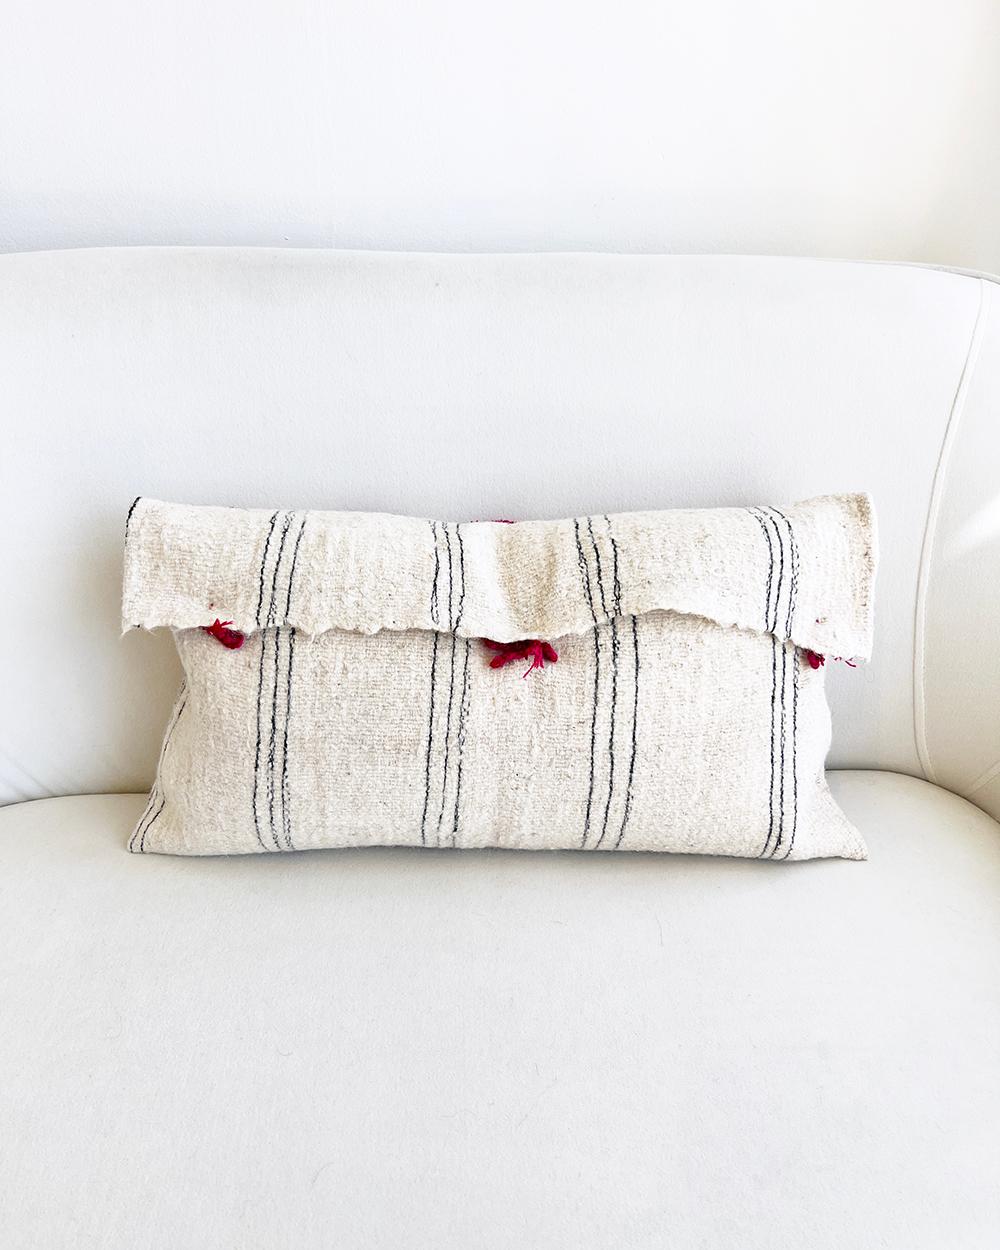 Hand-Woven Chamula White with Gray Stripes Red Pom Pom Throw Pillow Handmade from 100% Wool For Sale